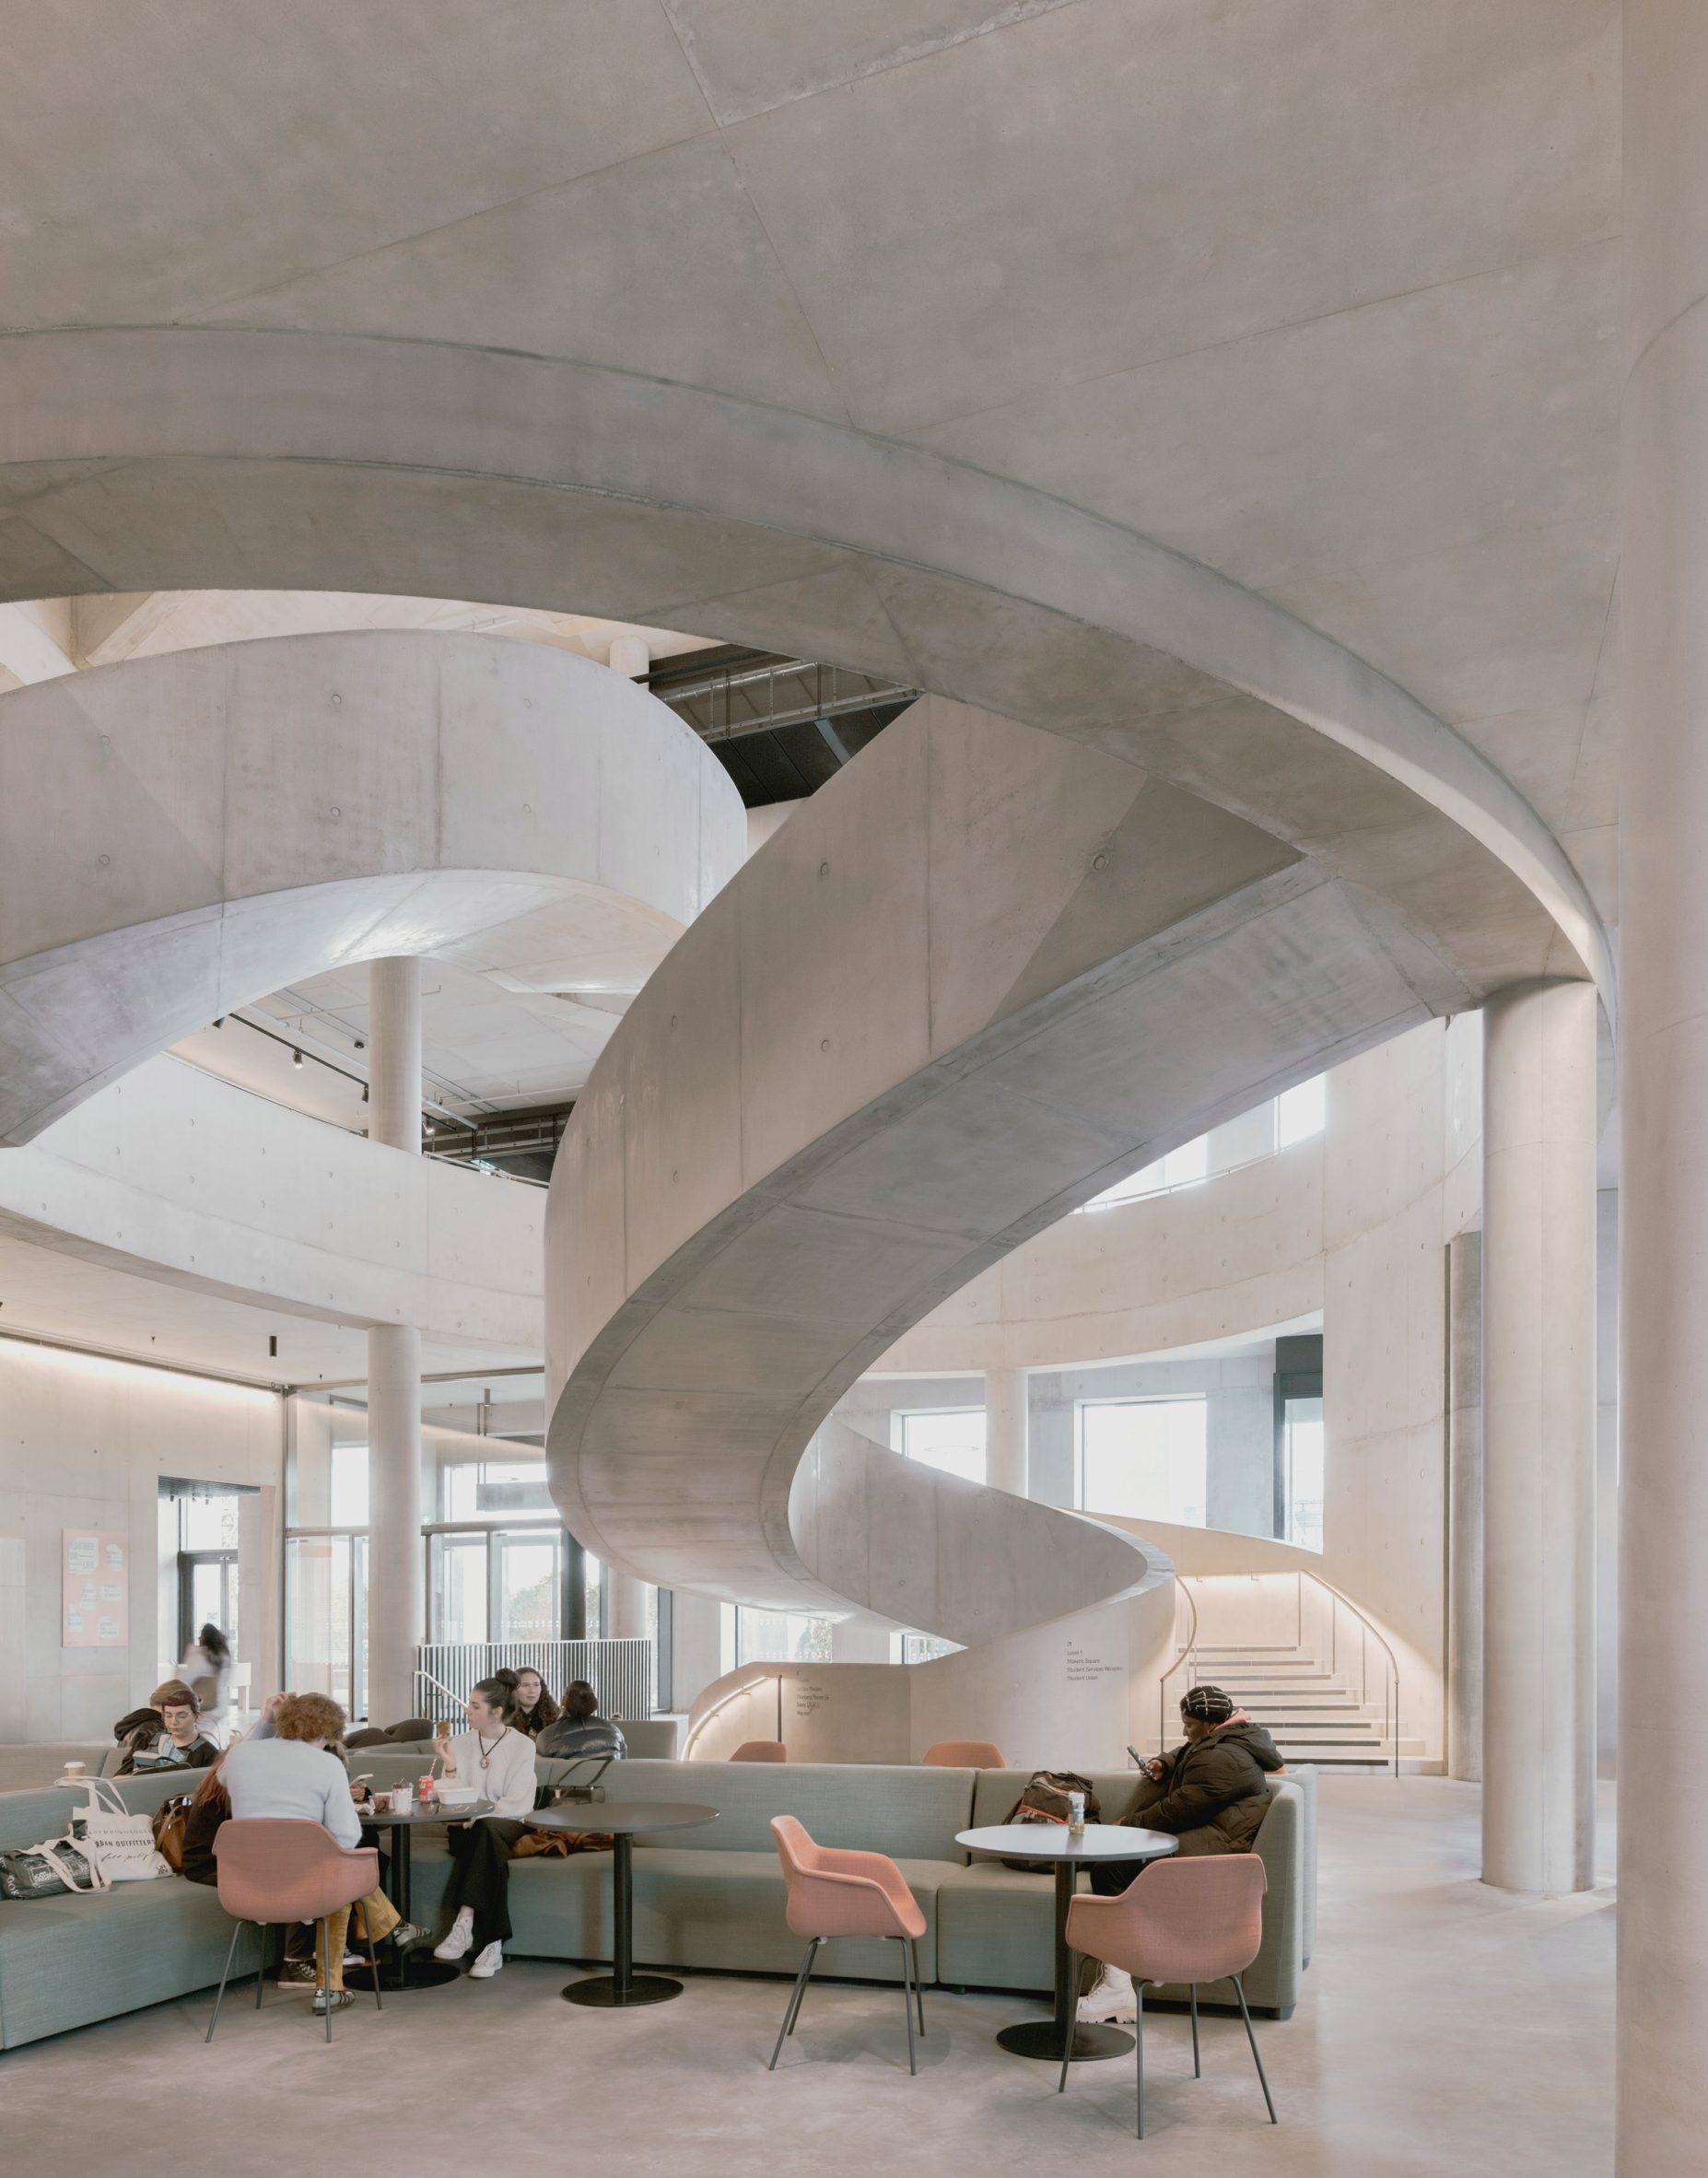 Concrete staircase at London College of Fashion by Allies and Morrison